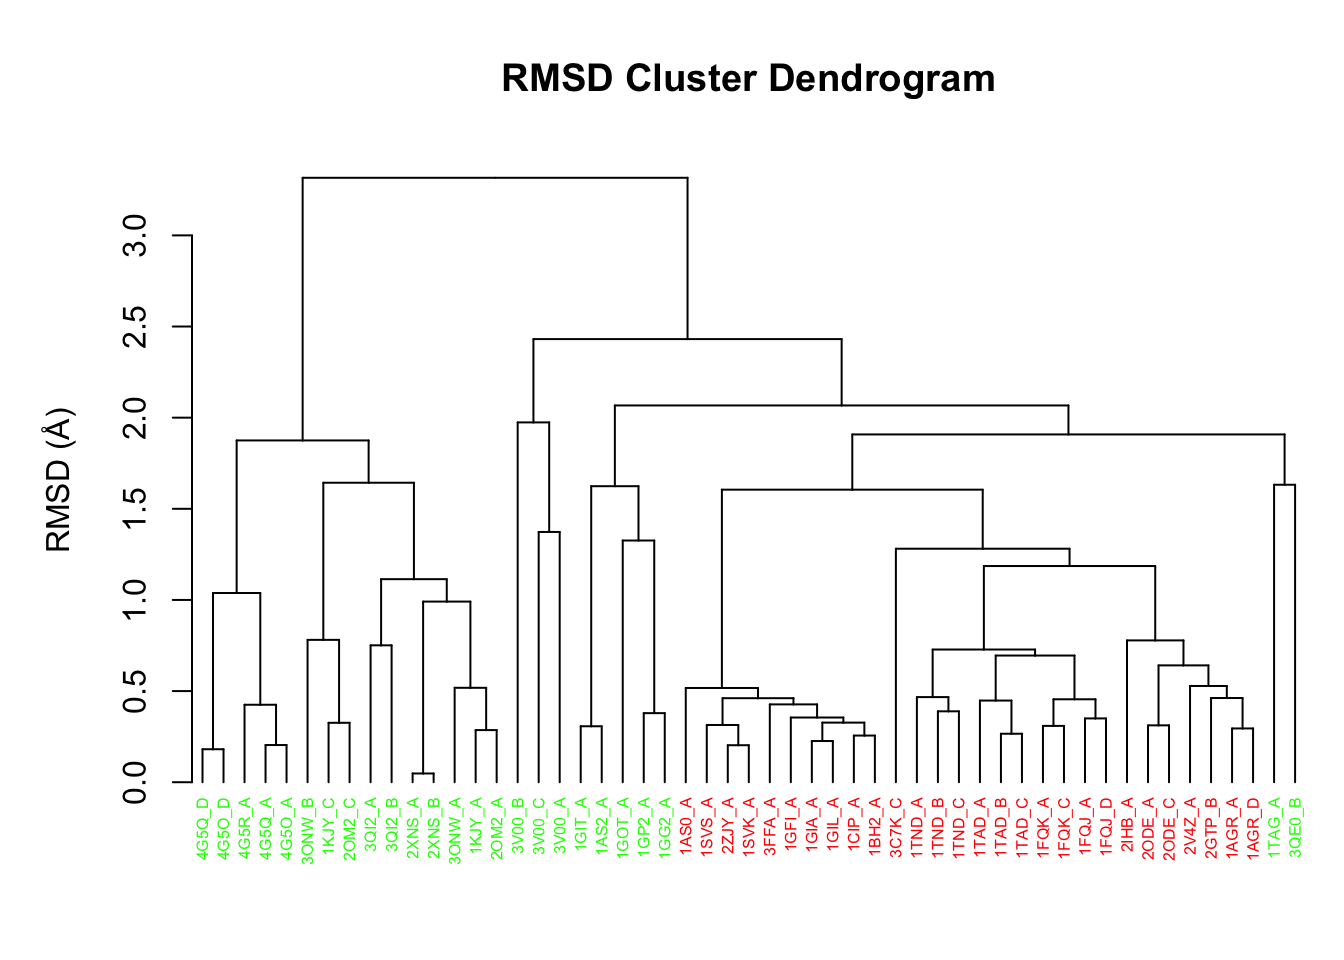 RMSD clustering of transducin structures